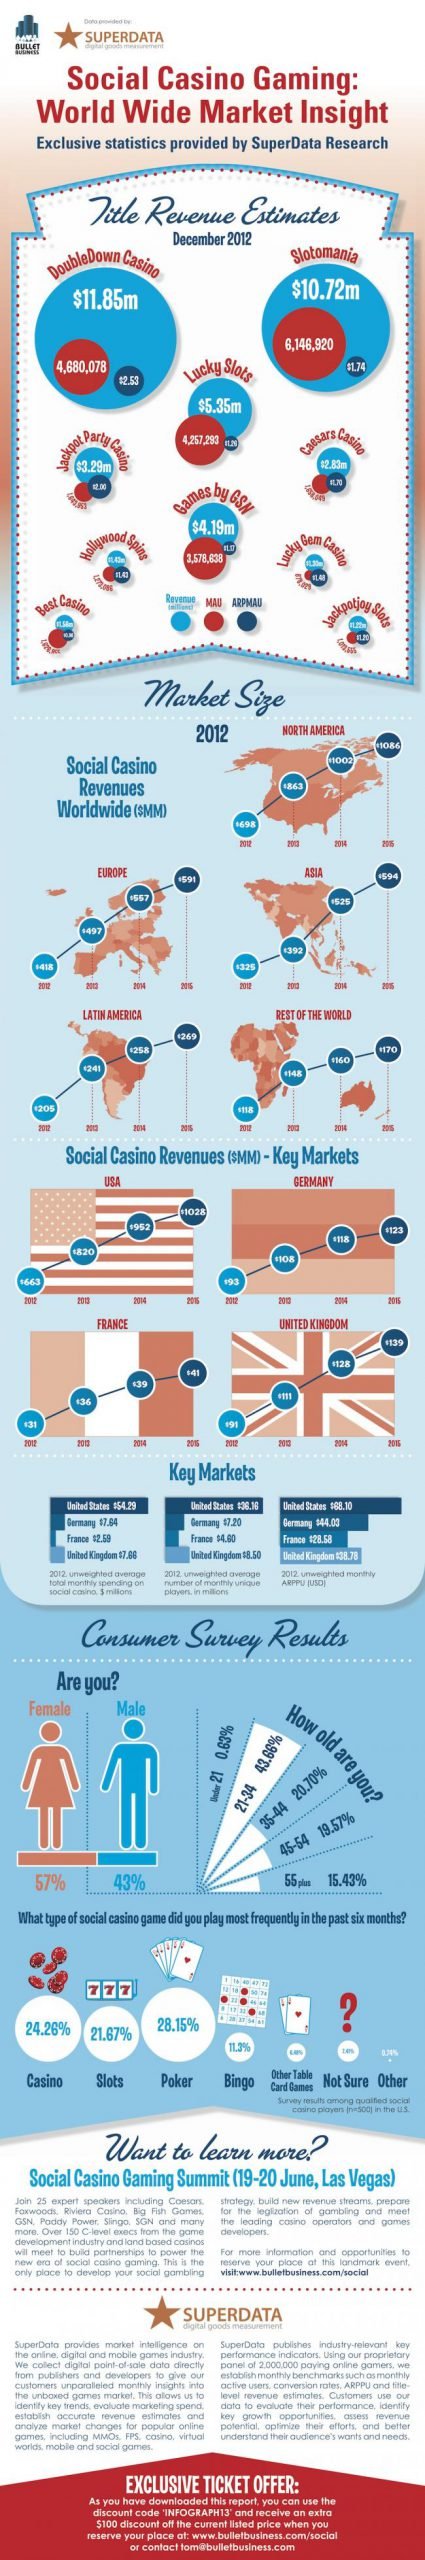 These online gambling stats will have your head spinning faster than a roulette wheel [infographic]